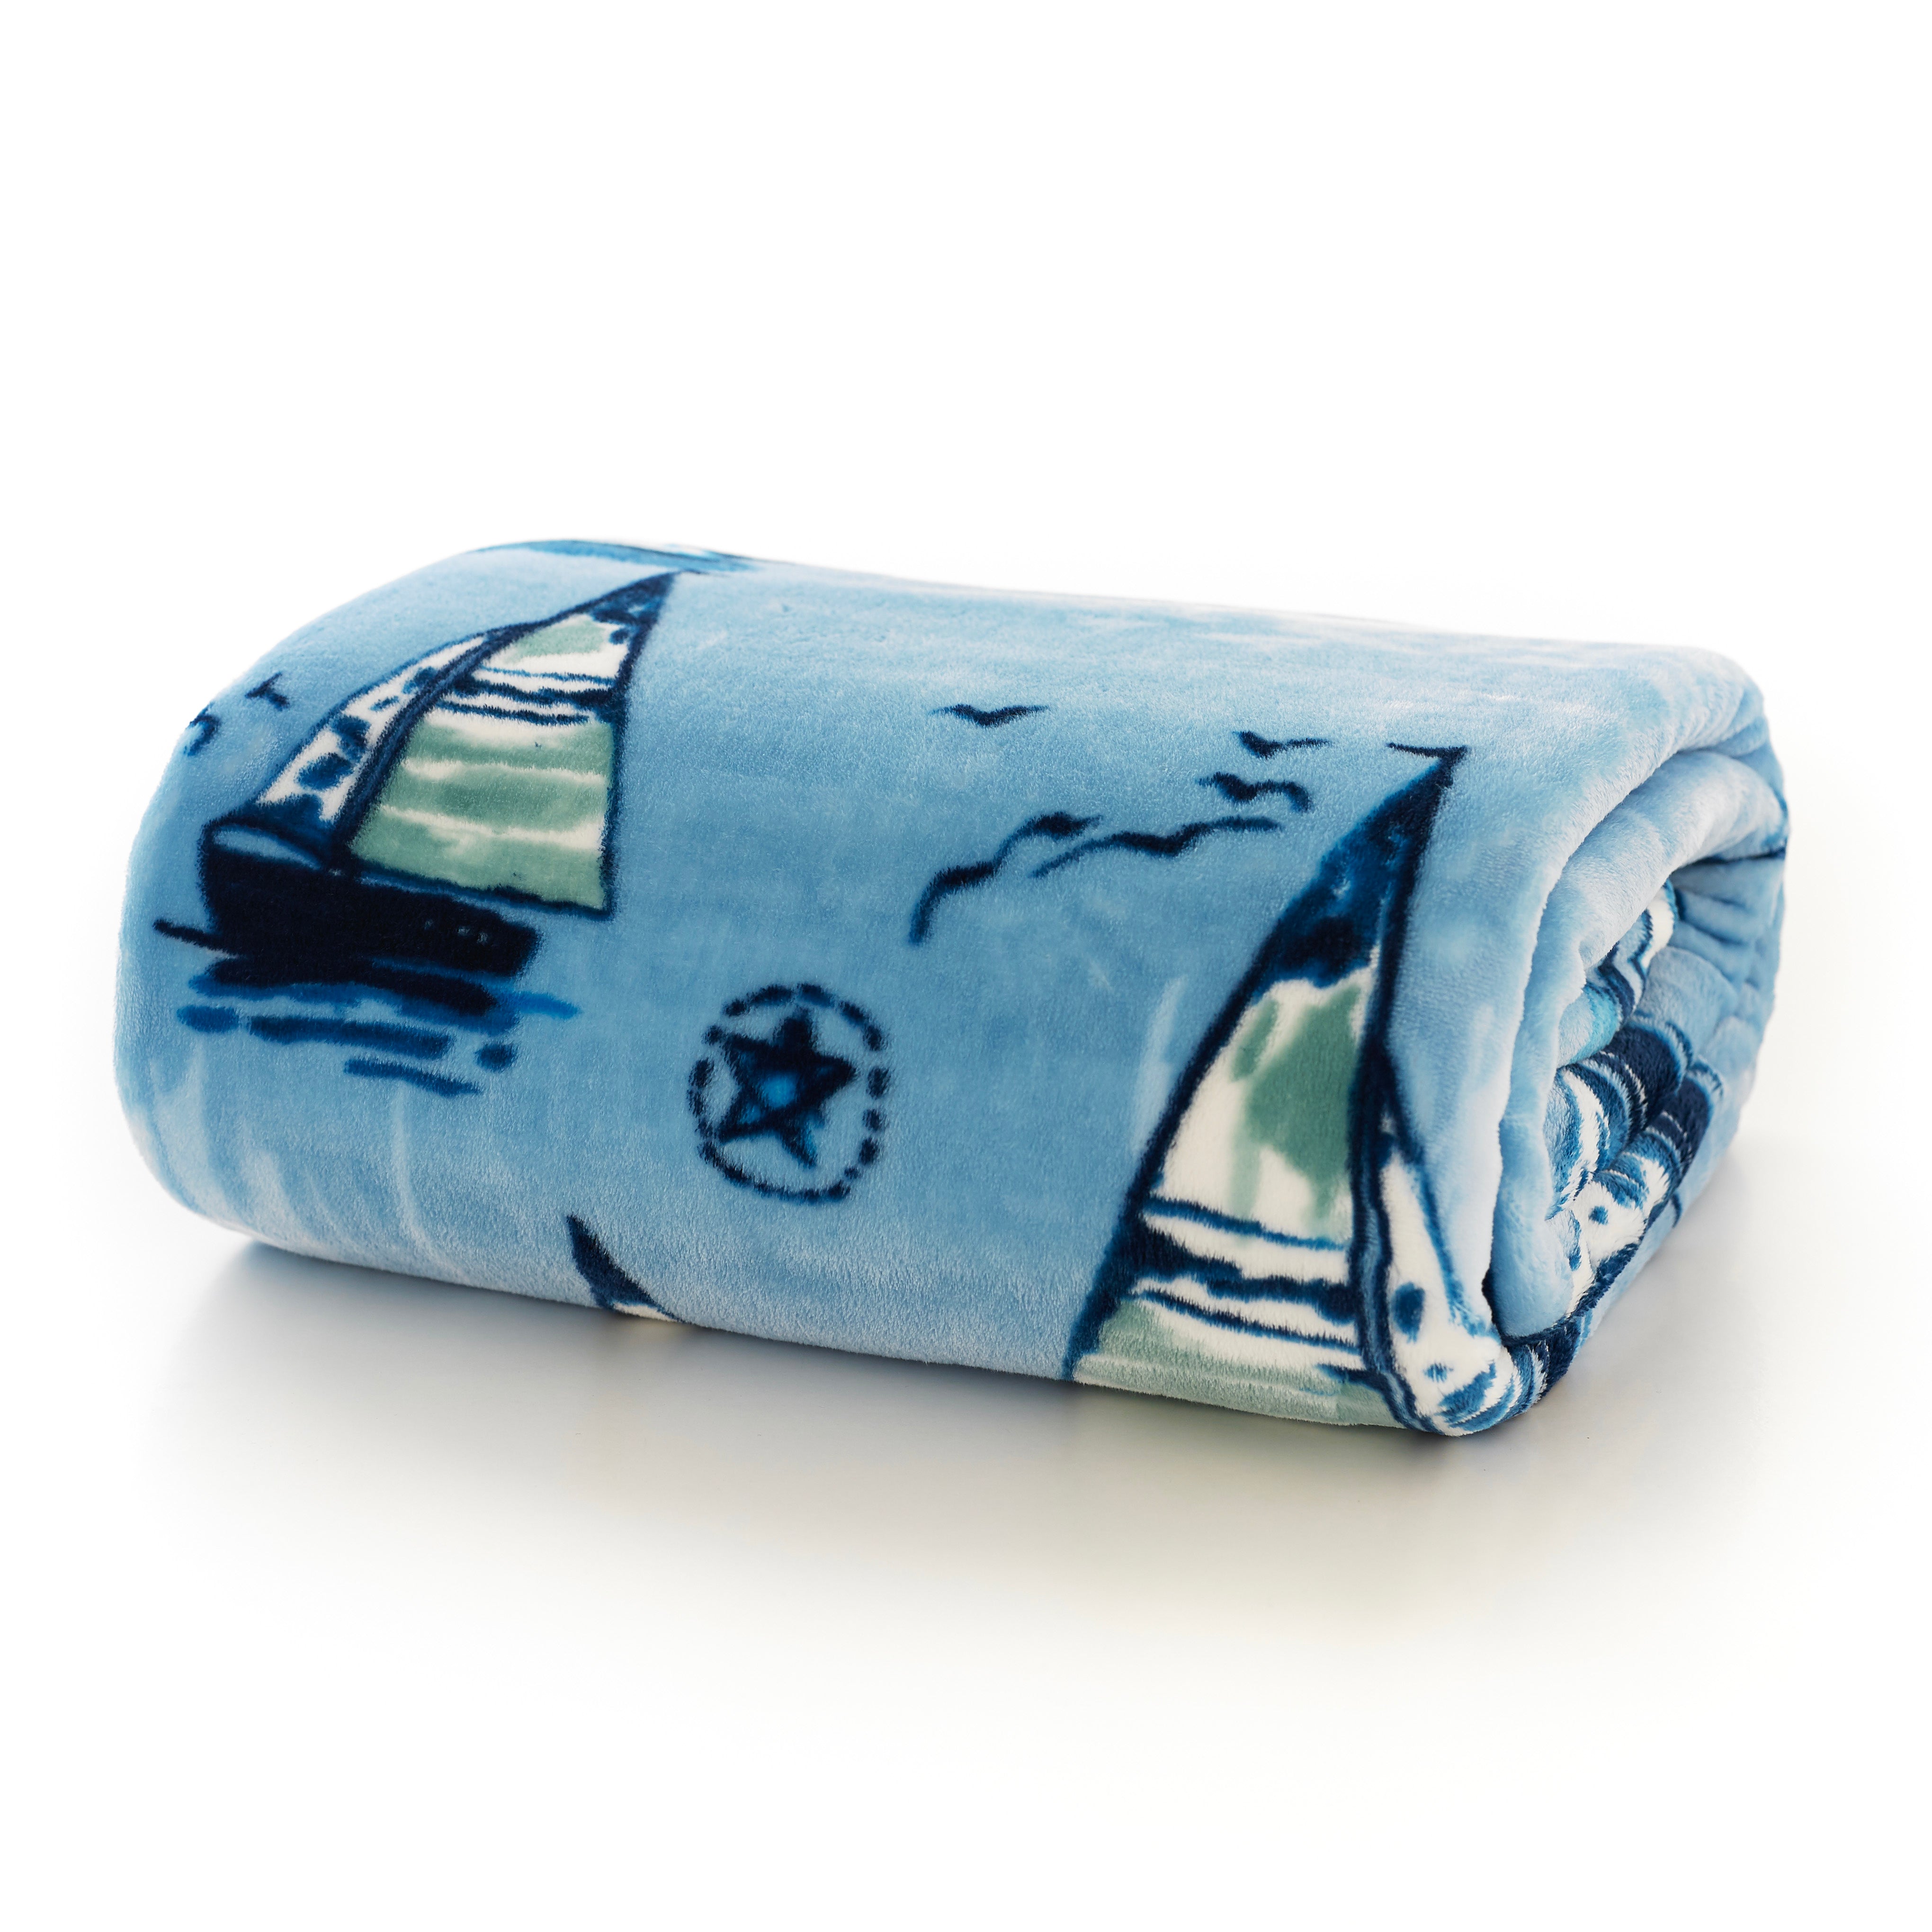 SuperSoft Printed Fleece Throw Channel